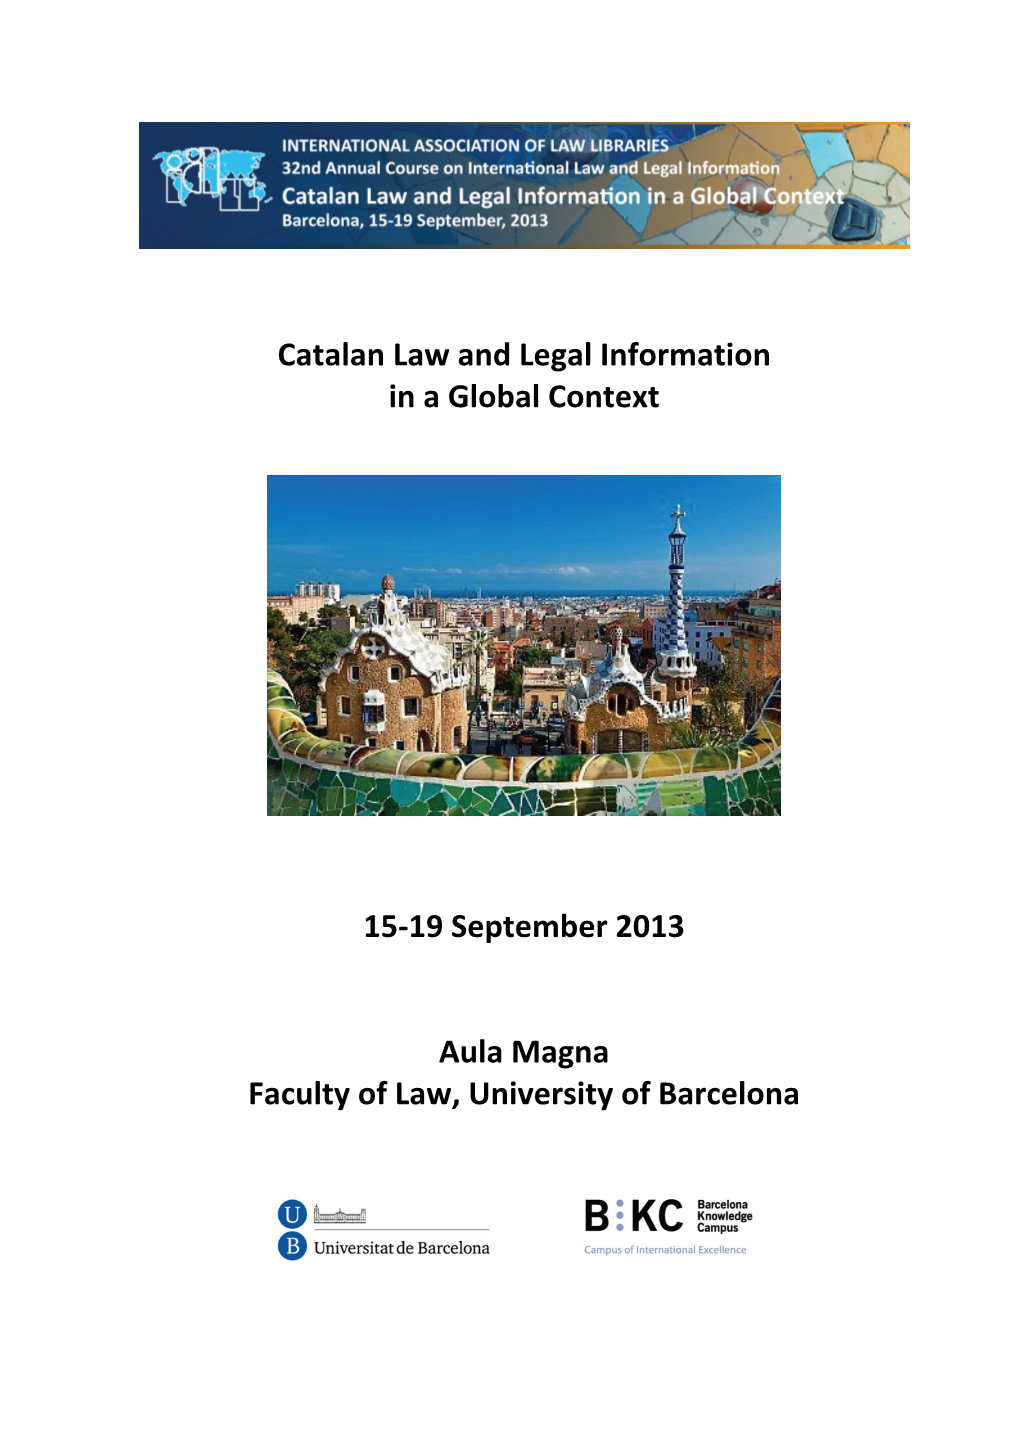 Catalan Law and Legal Information in a Global Context 15-19 September